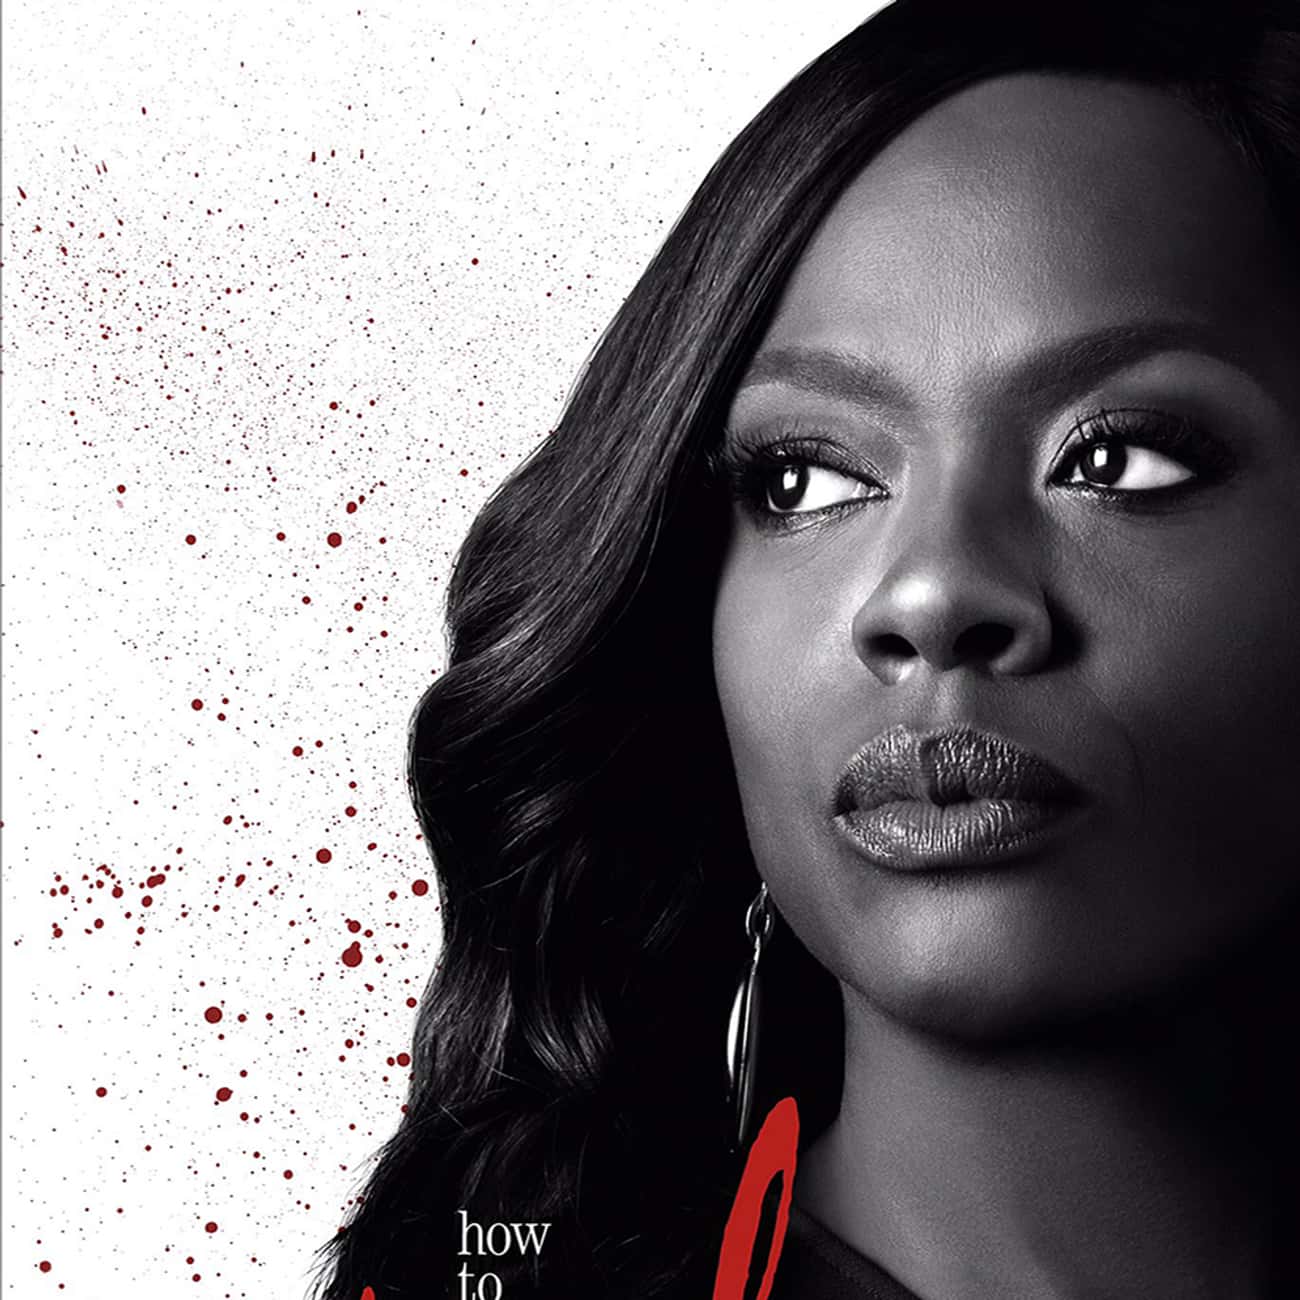 How To Get Away With Murder - Season 4